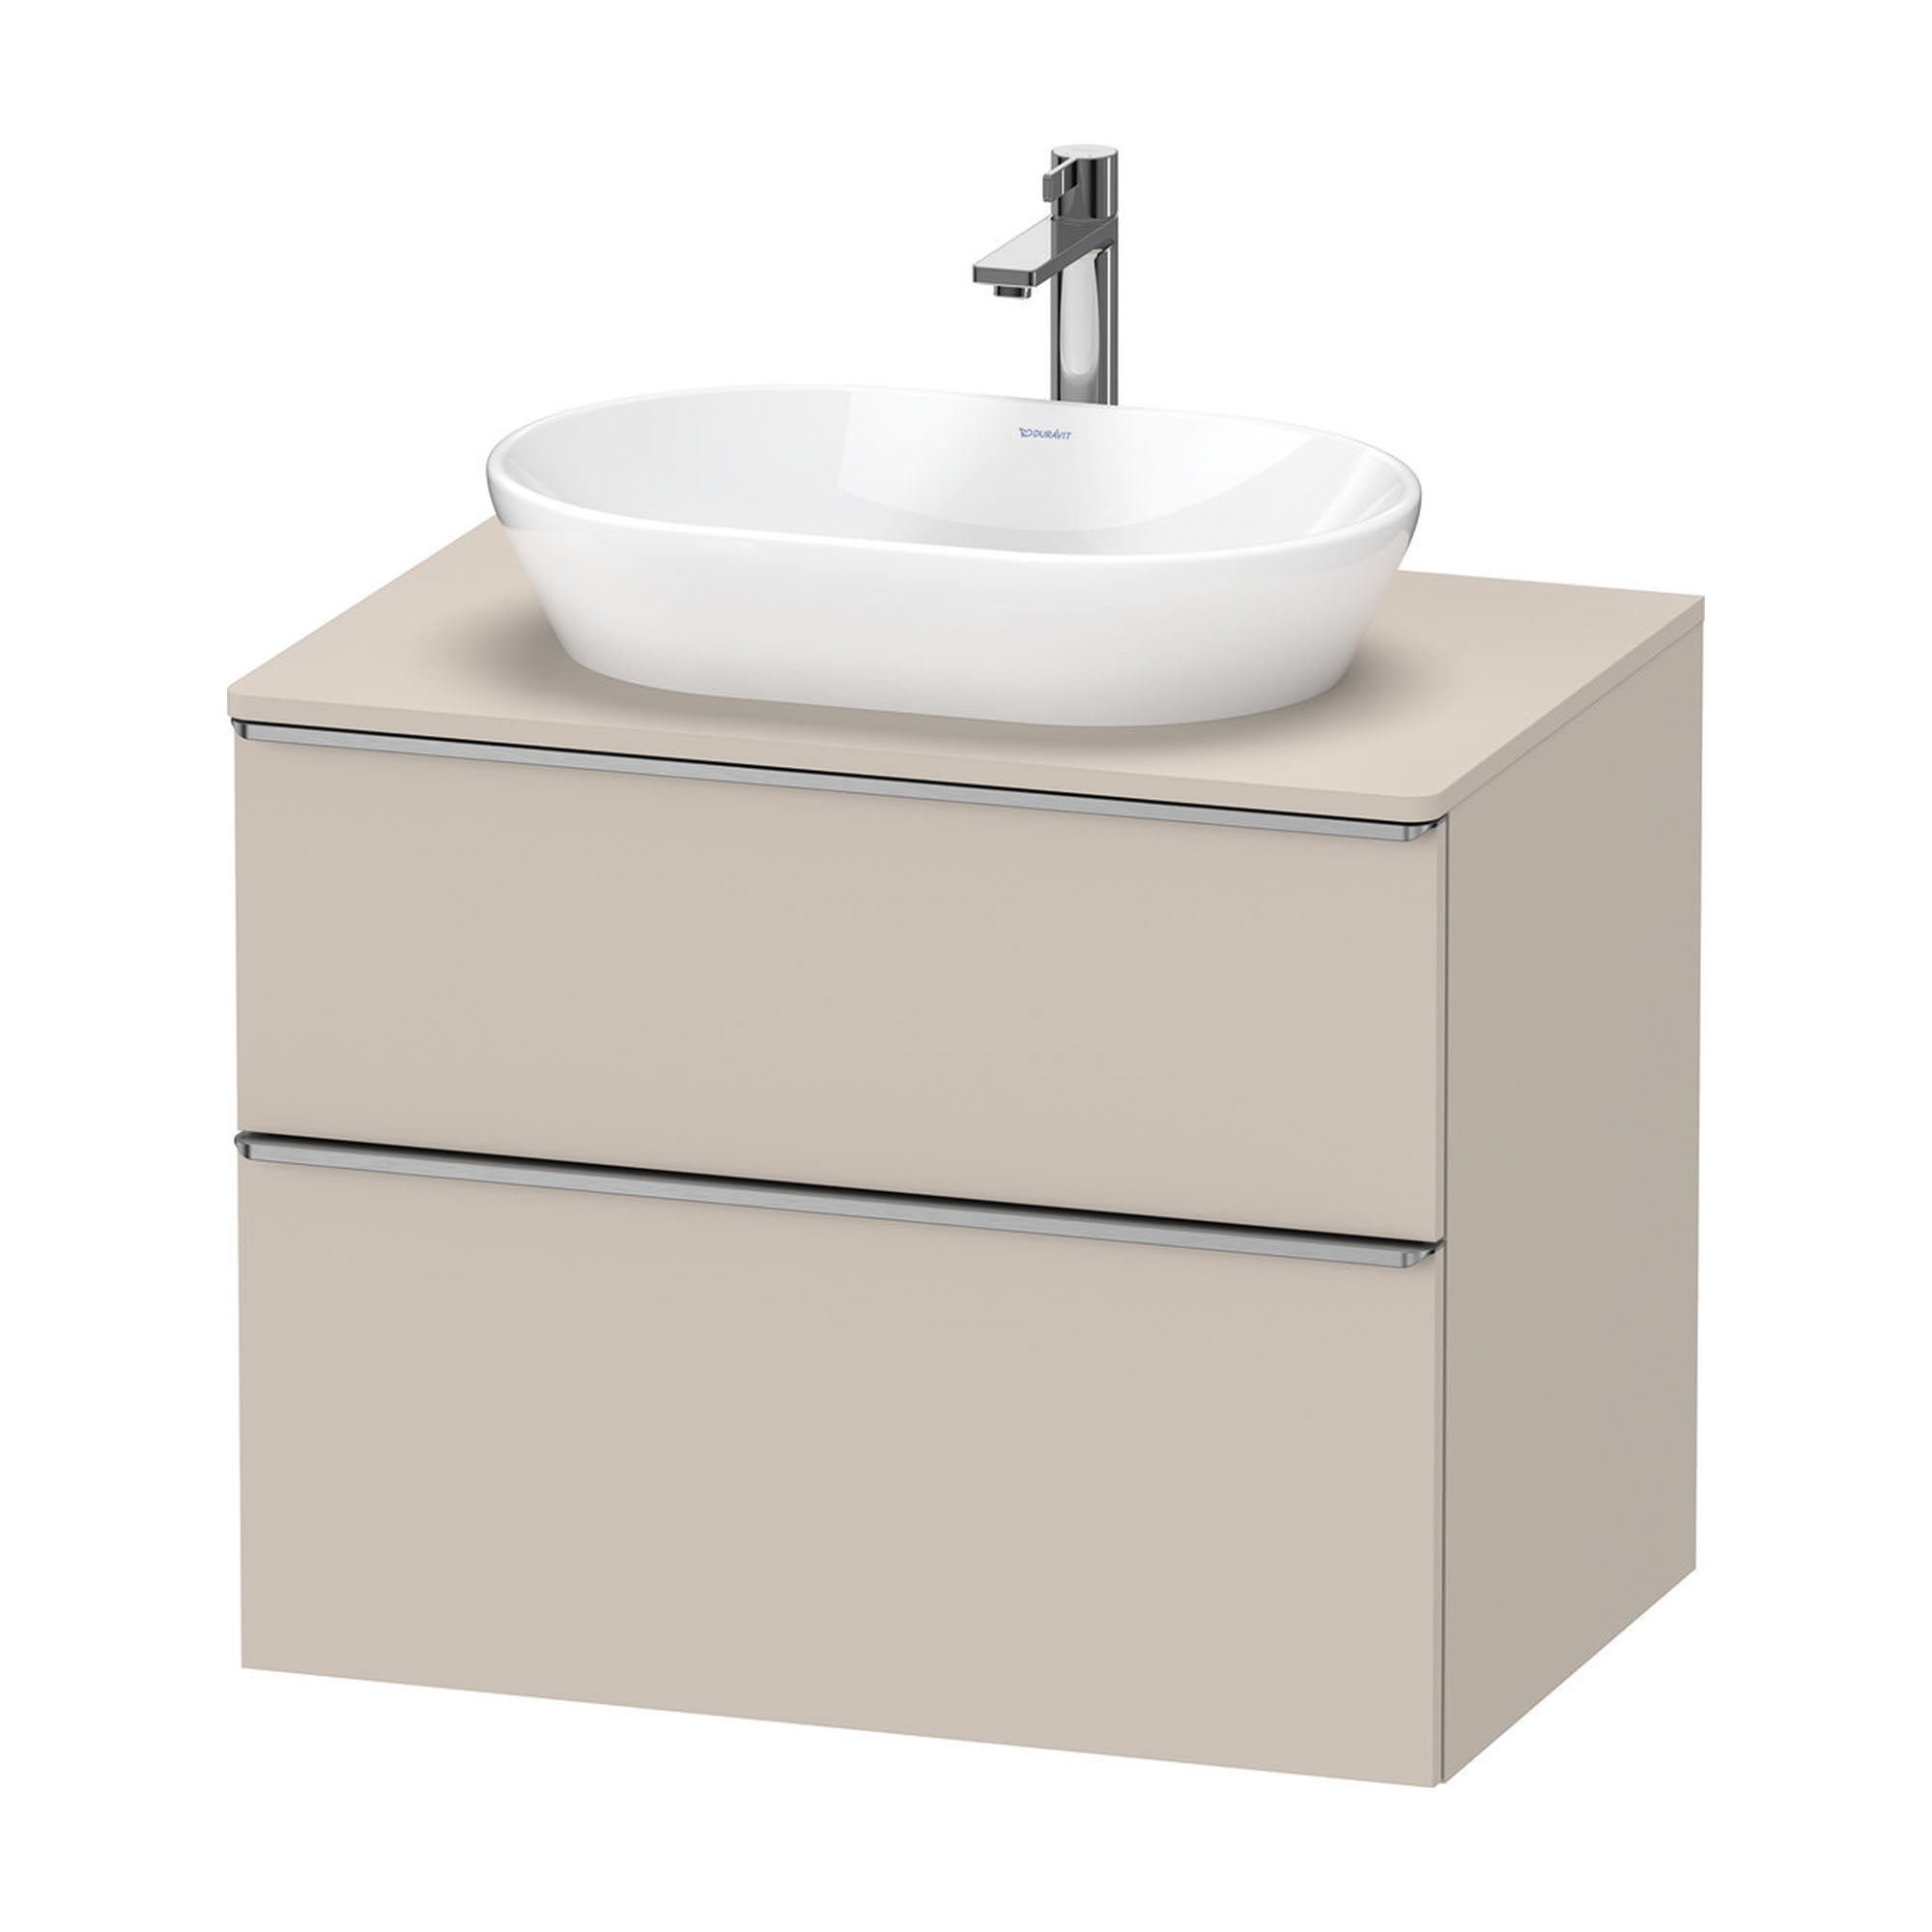 duravit d-neo 800 wall mounted vanity unit with worktop taupe stainless steel handles